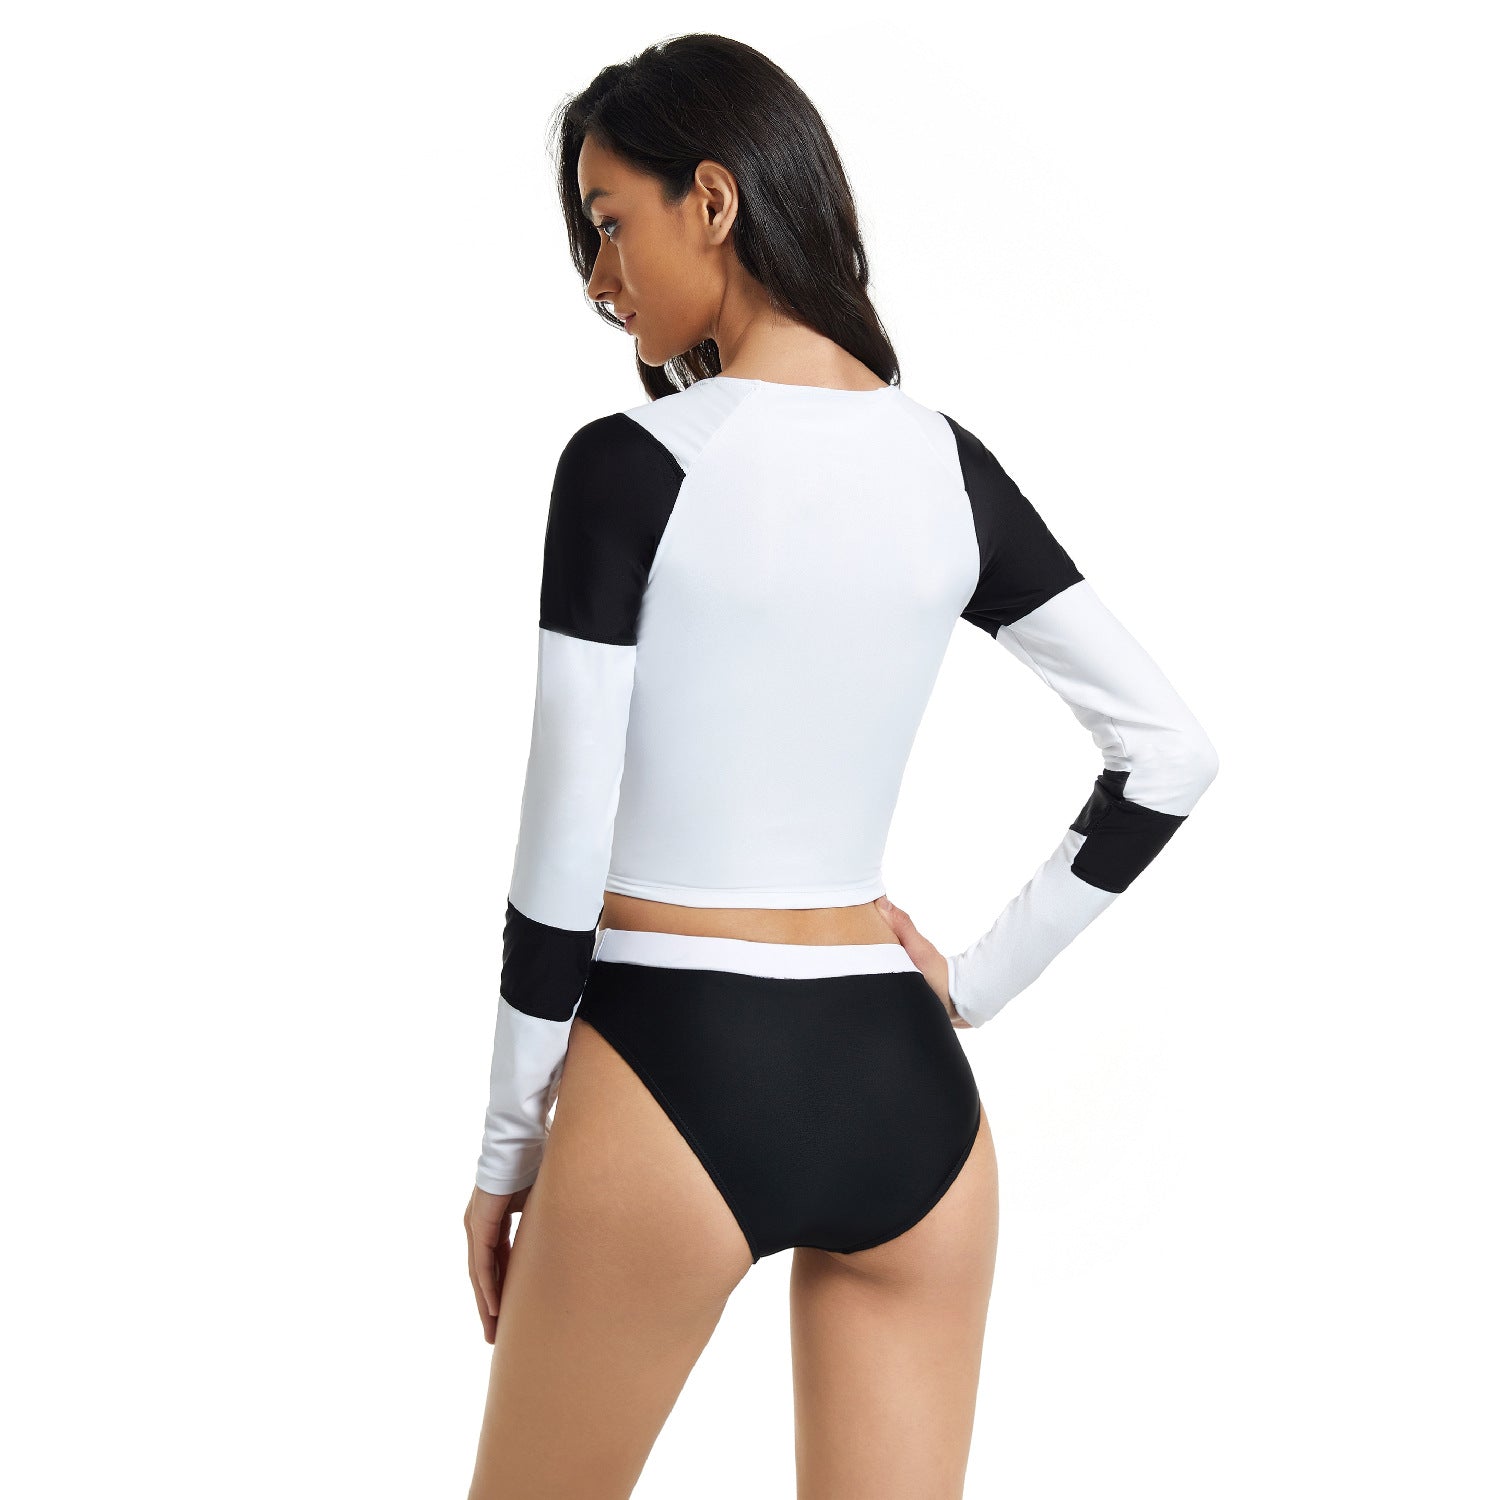 Black and Wihte Long Sleeves Surfing Wetsuits for Women-Swimwear-Free Shipping at meselling99